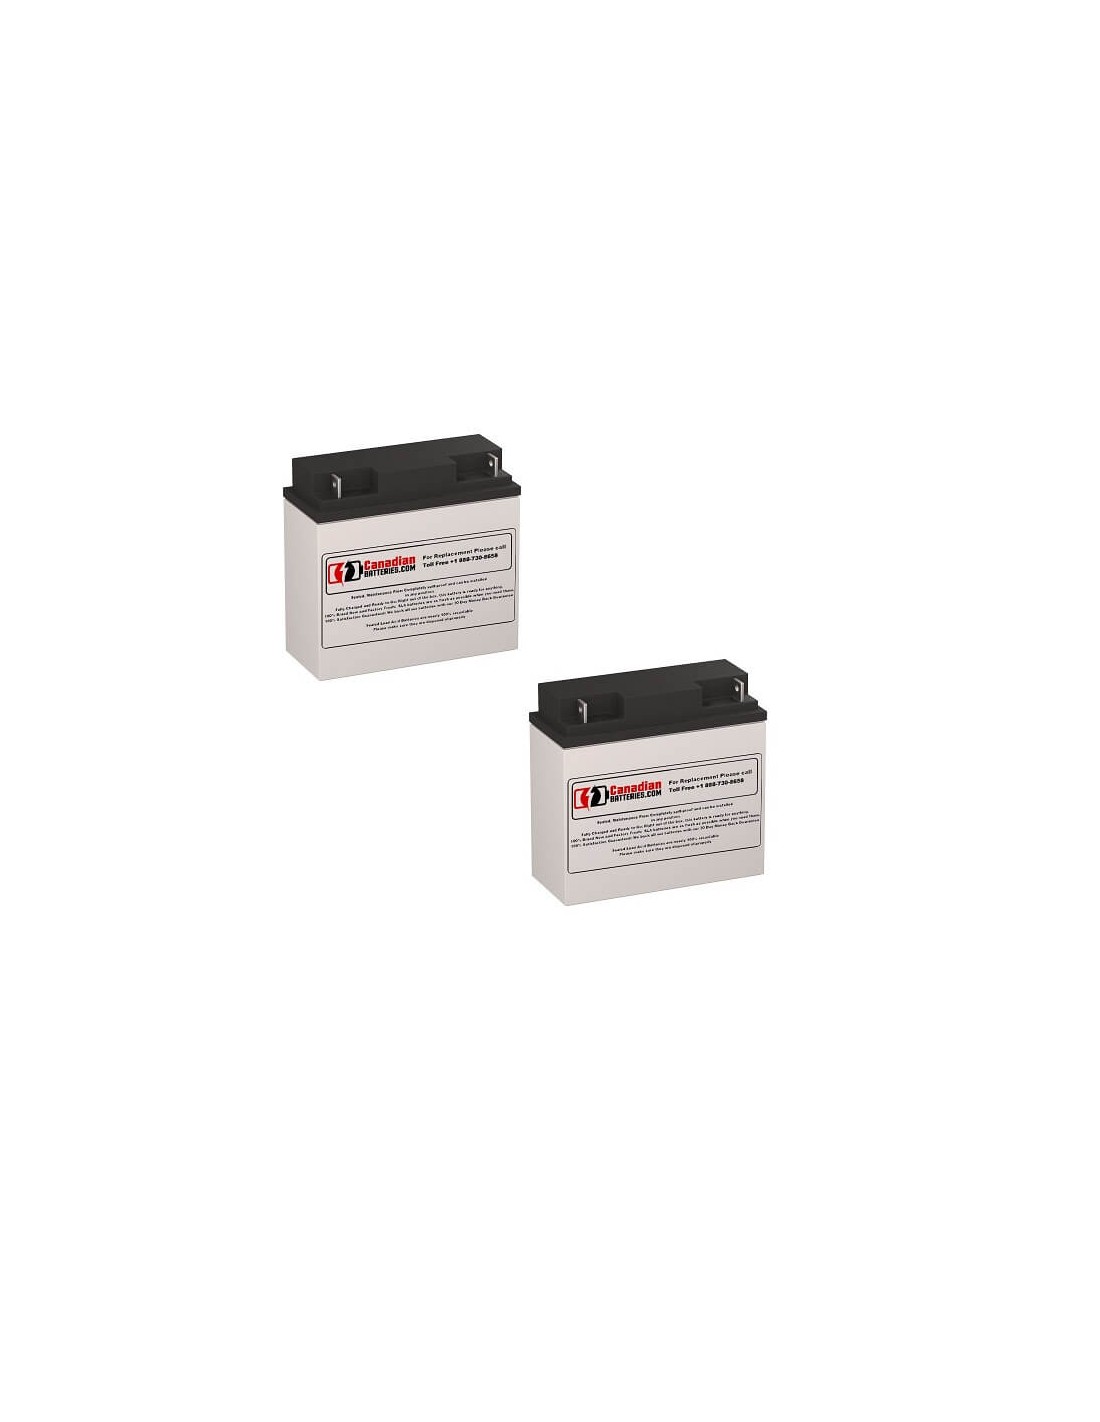 Batteries for Oneac Onexbc-w-217 UPS, 2 x 12V, 18Ah - 216Wh